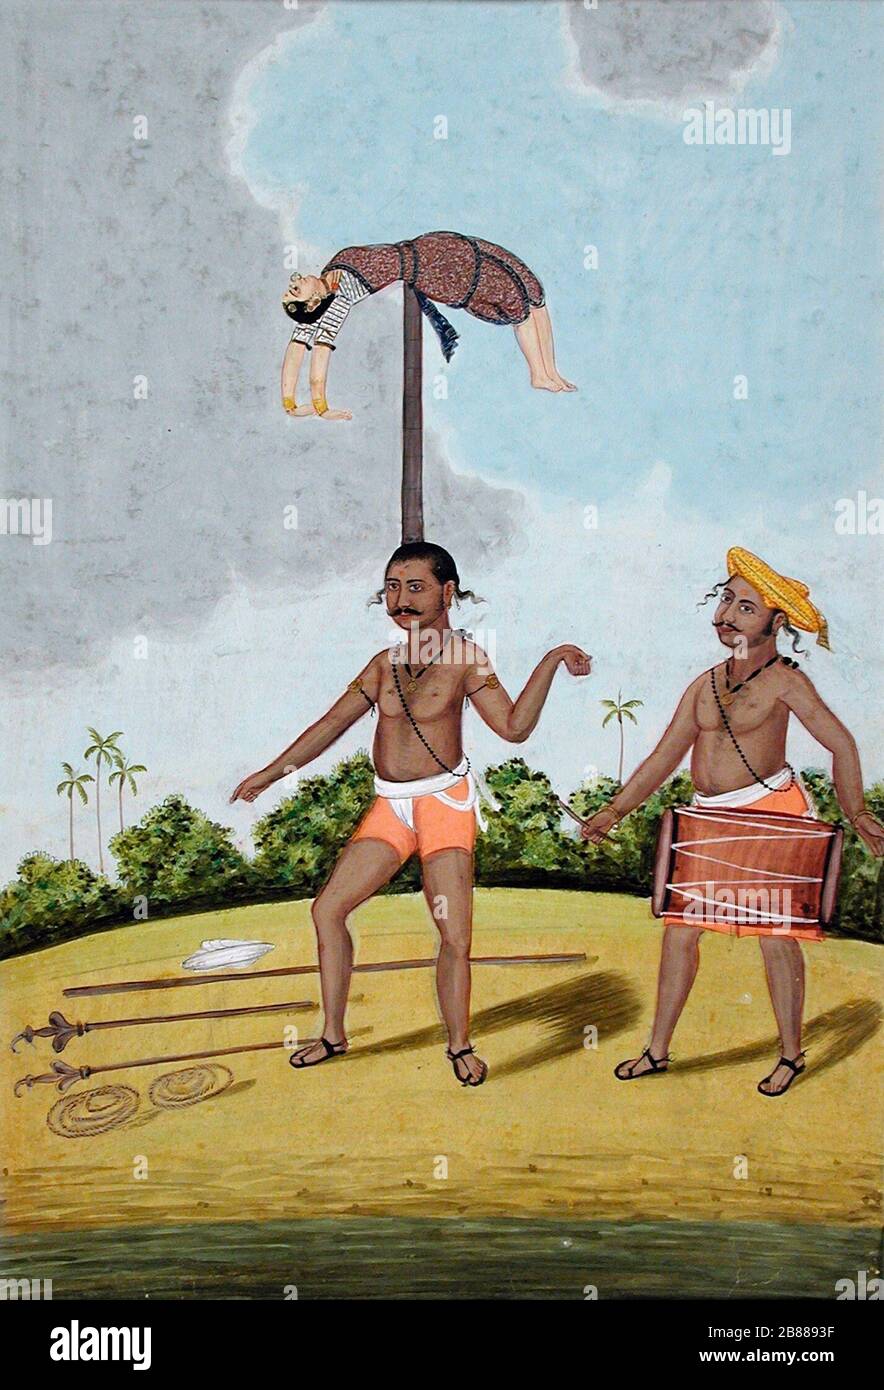 Acrobats; English: India, Tamil Nadu, Thanjavur (Tanjore), circa 1850  Drawings; watercolors Opaque watercolor and ink on paper Indian Art Special  Purpose Fund (.2) South and Southeast Asian Art; circa 1850 date  QS:P571,+1850-00-00T00:00:00Z/9 ...